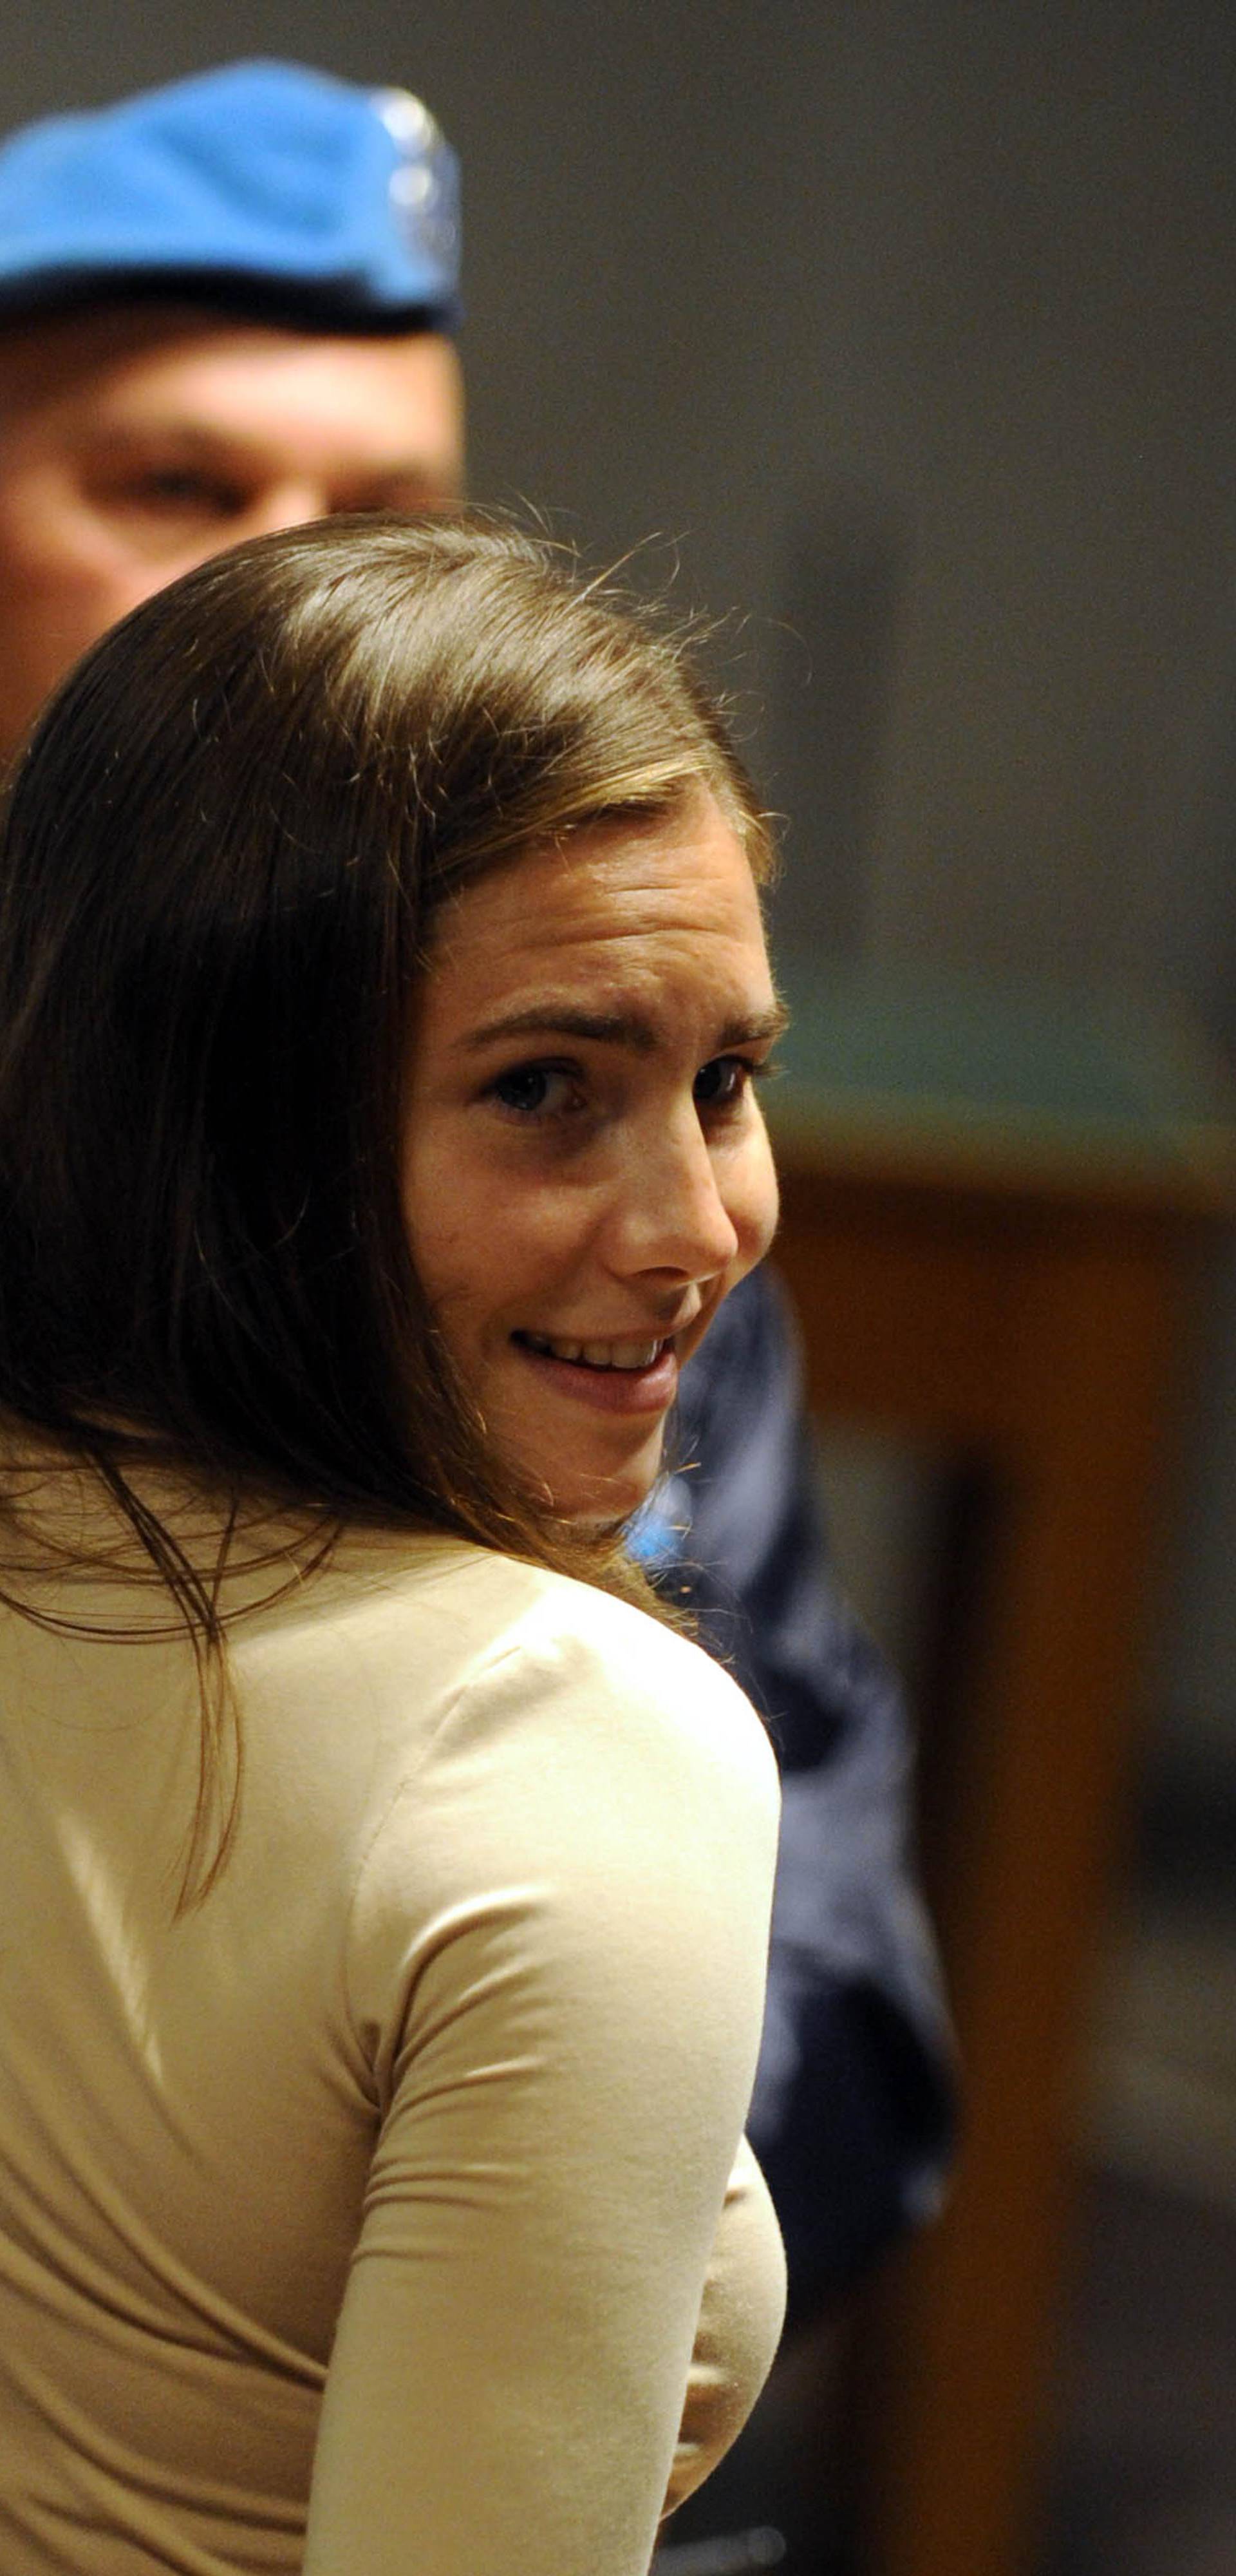 Perugia, Italy - Trial for the murder of Meredith Kercher